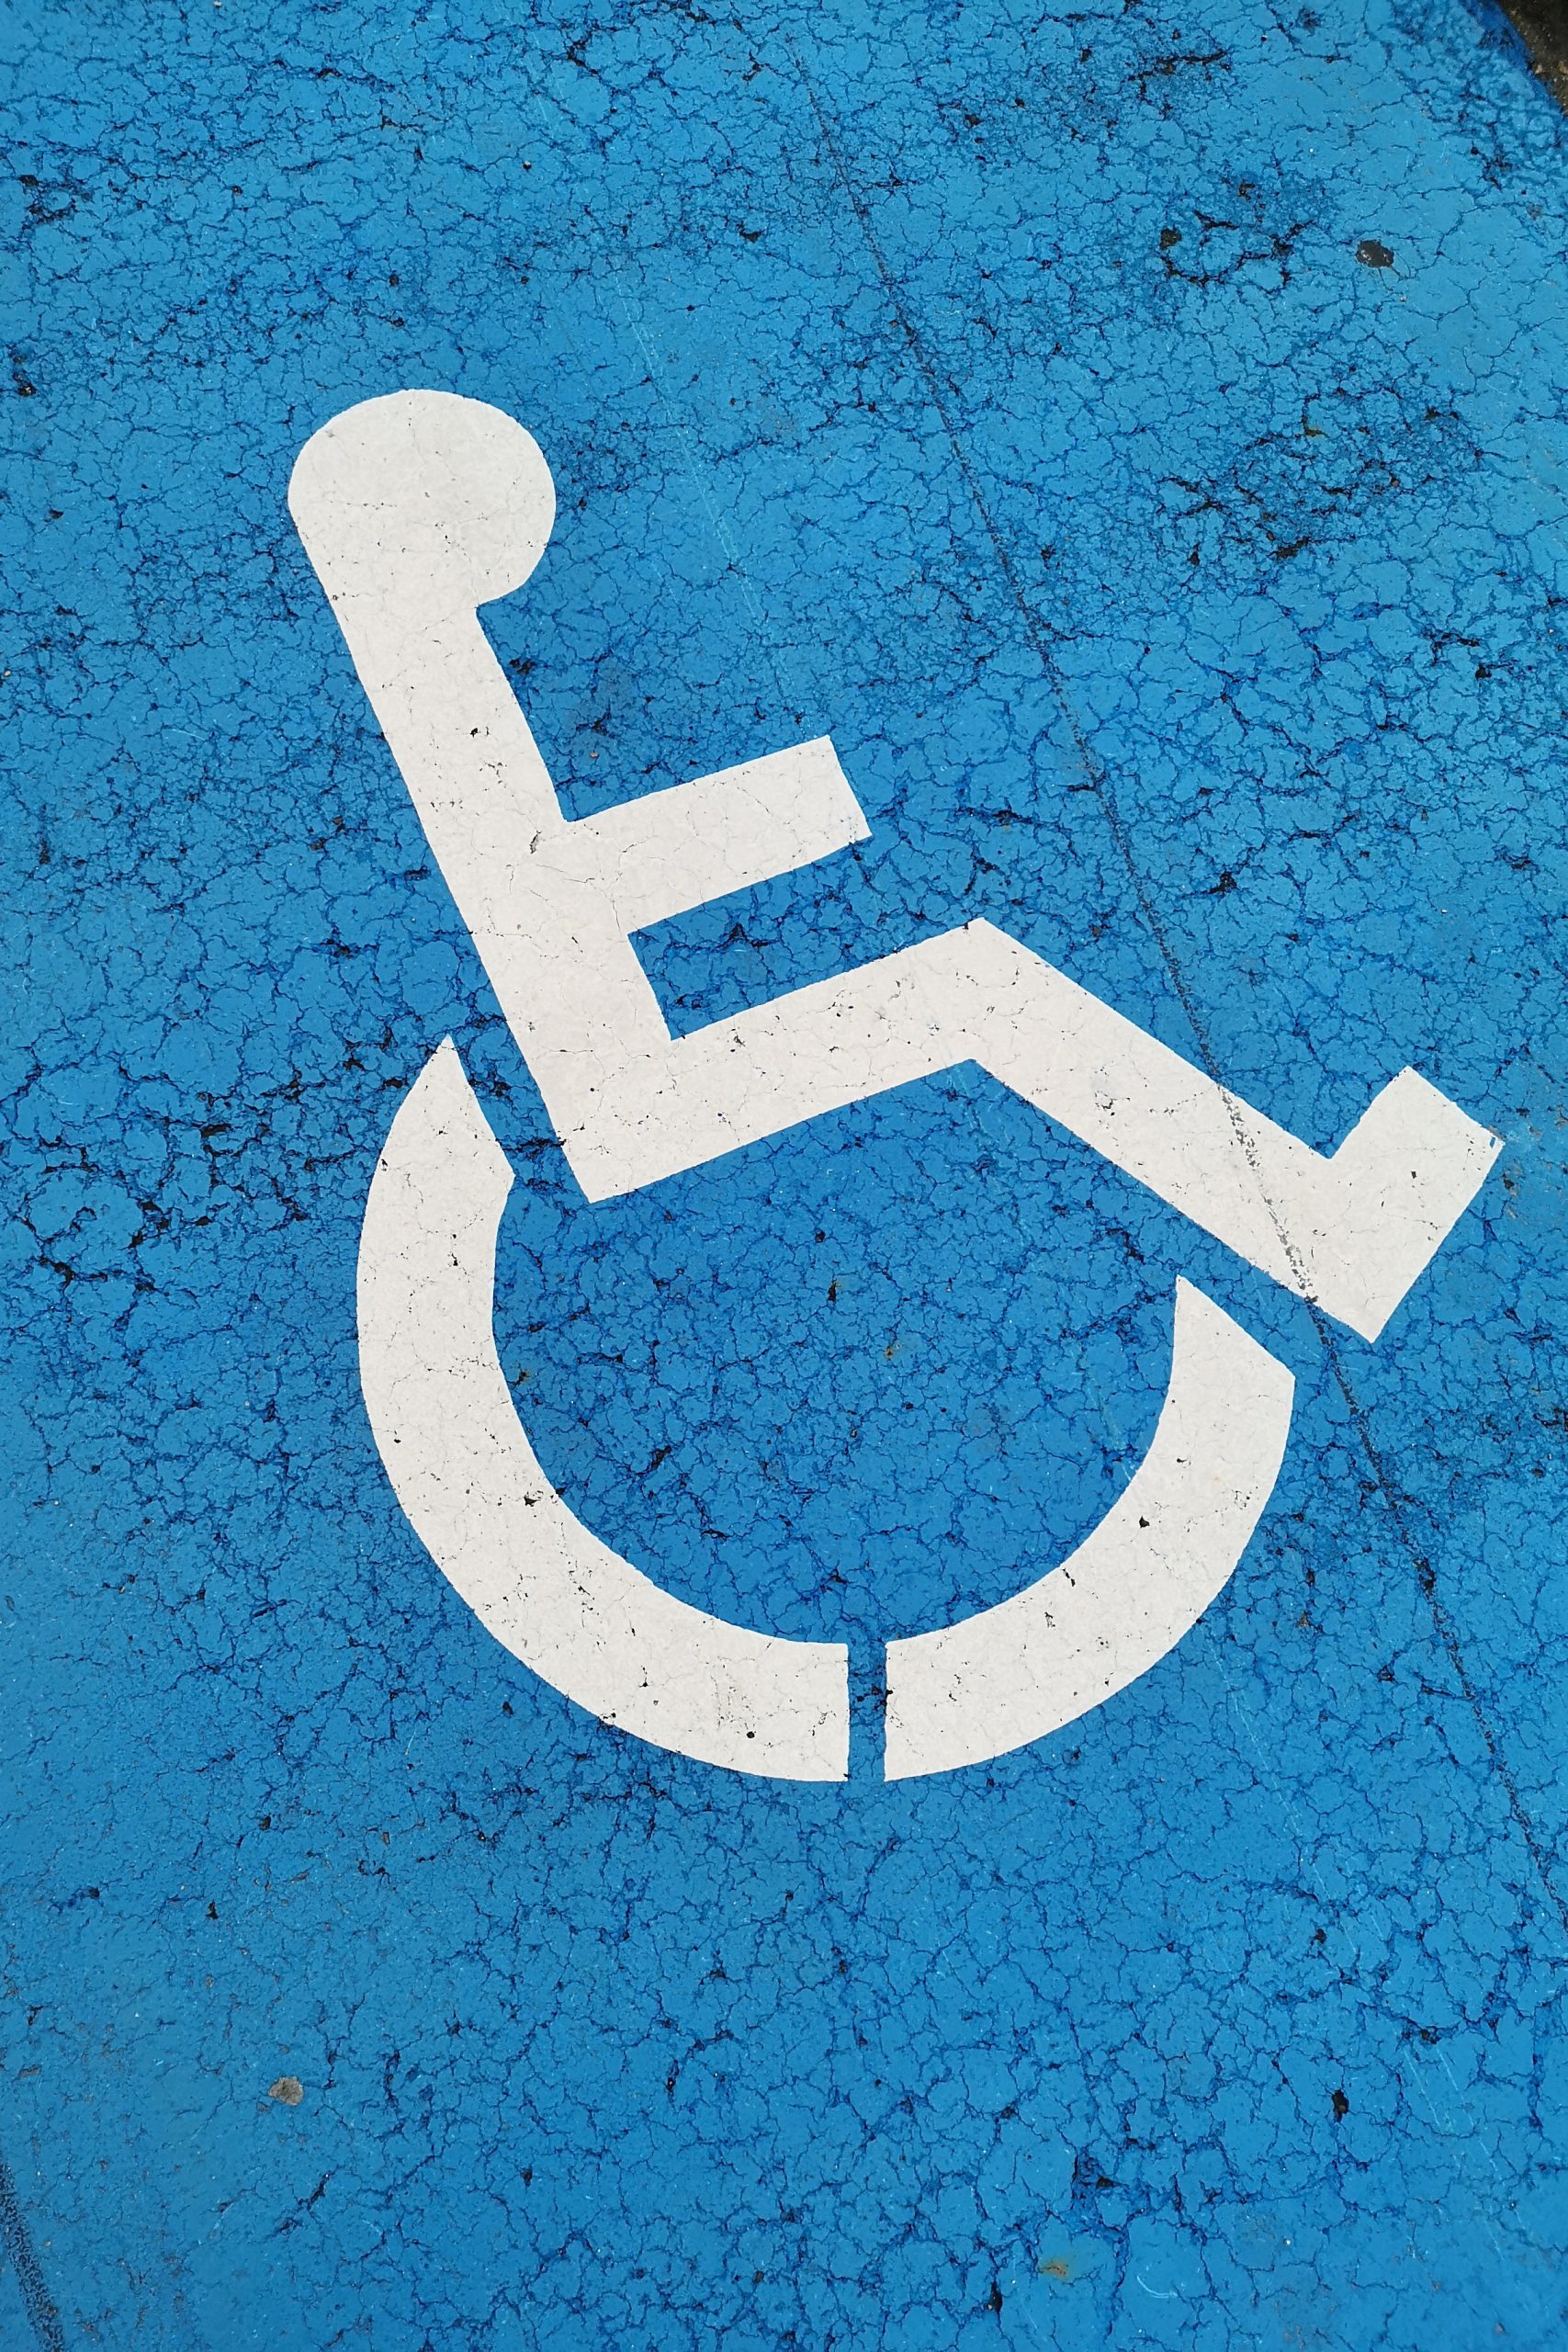 A portrait photo is filled with the disability symbol against a blue background